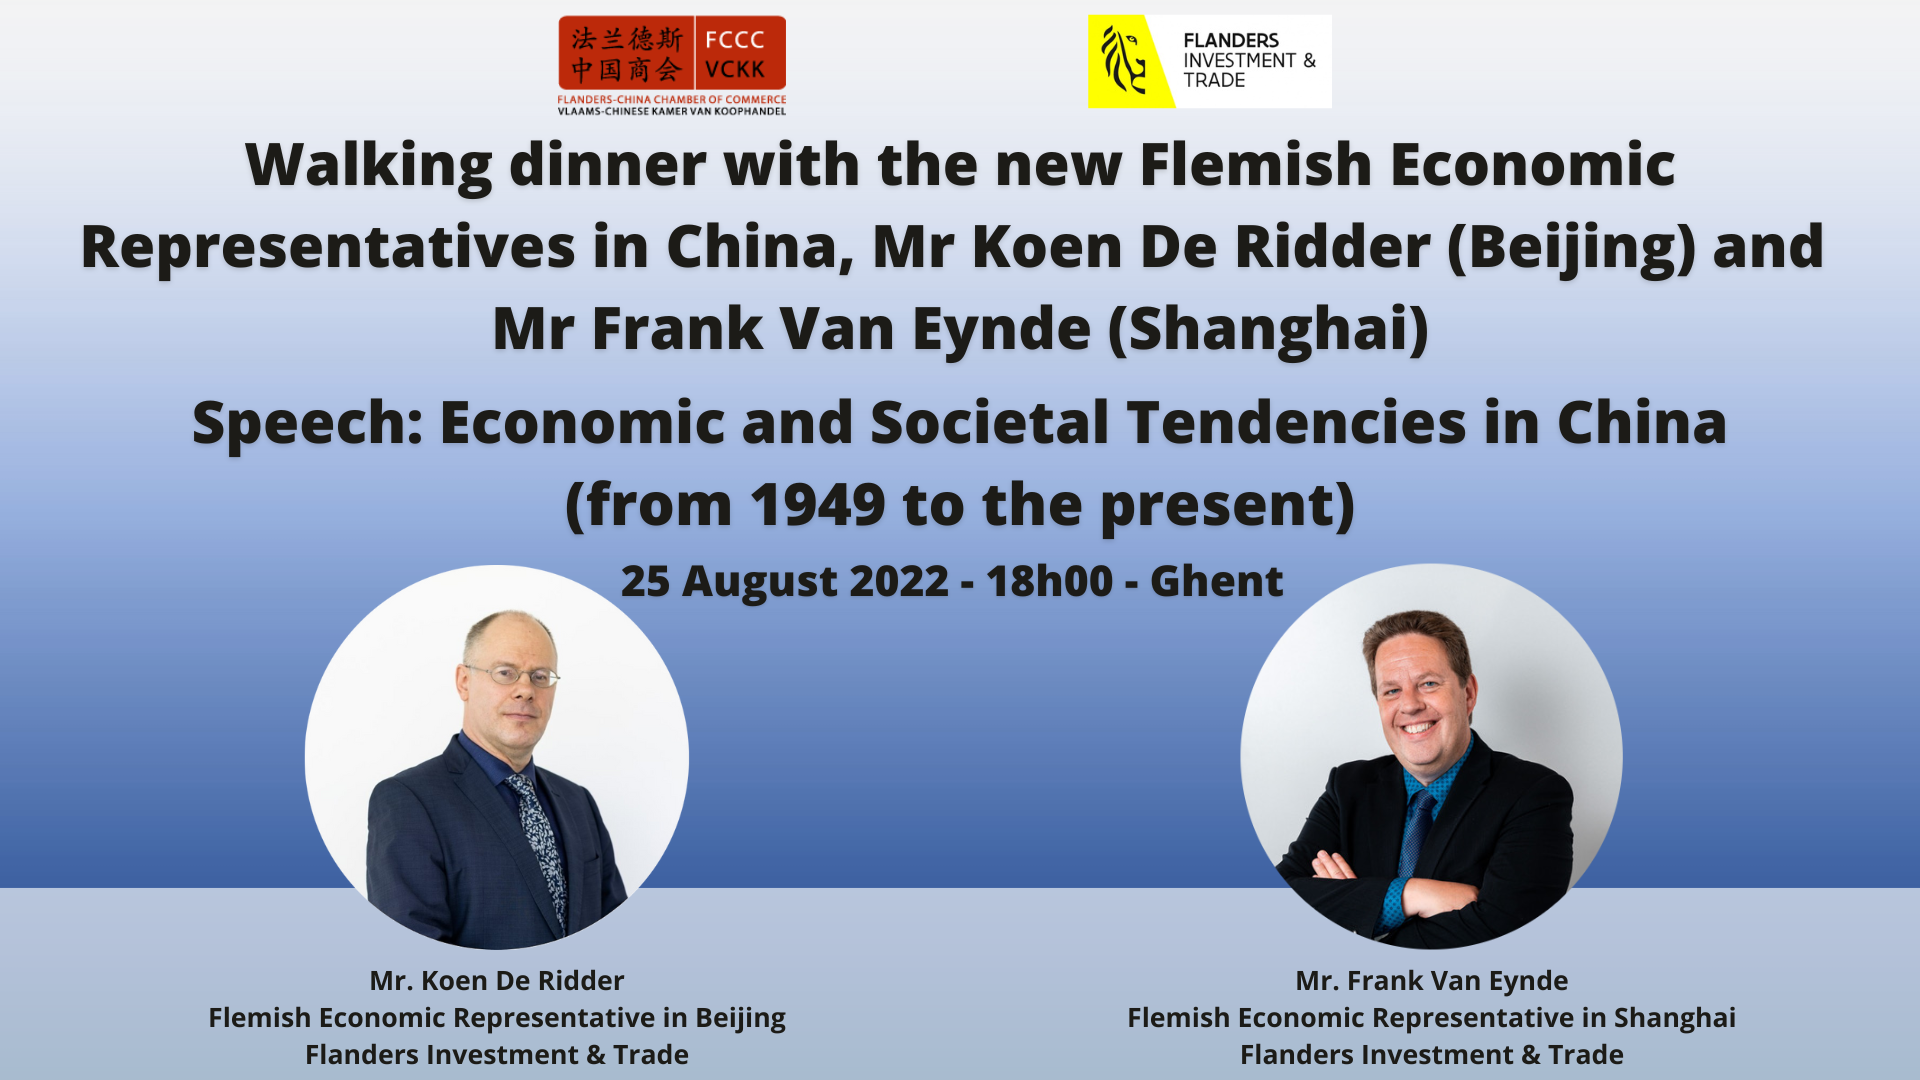 Walking dinner with the new Flemish Economic Representatives in China, Mr. Koen De Ridder (Beijing) and Mr. Frank Van Eynde (Shanghai) - Speech: Economic and societal tendencies in China (from 1949 to the present) - 25 August 2022 – 18h – Ghent